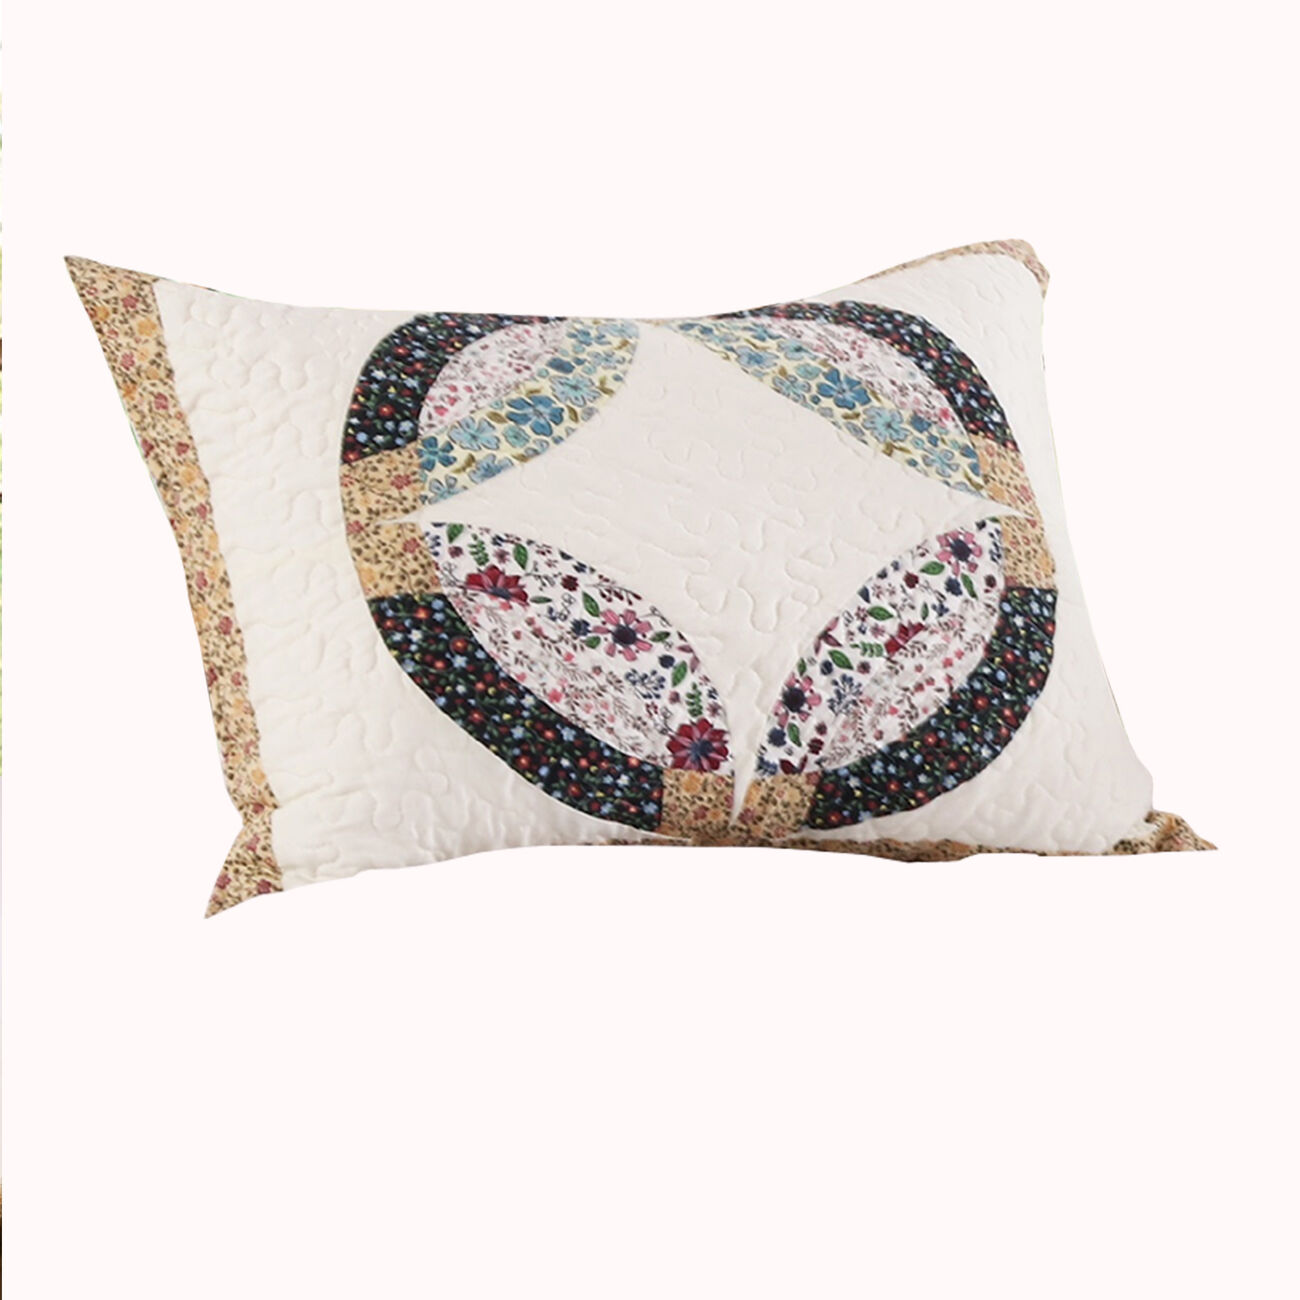 26 x 20 Polyester Standard Size Pillow Sham with Ring Patchwork, Multicolor